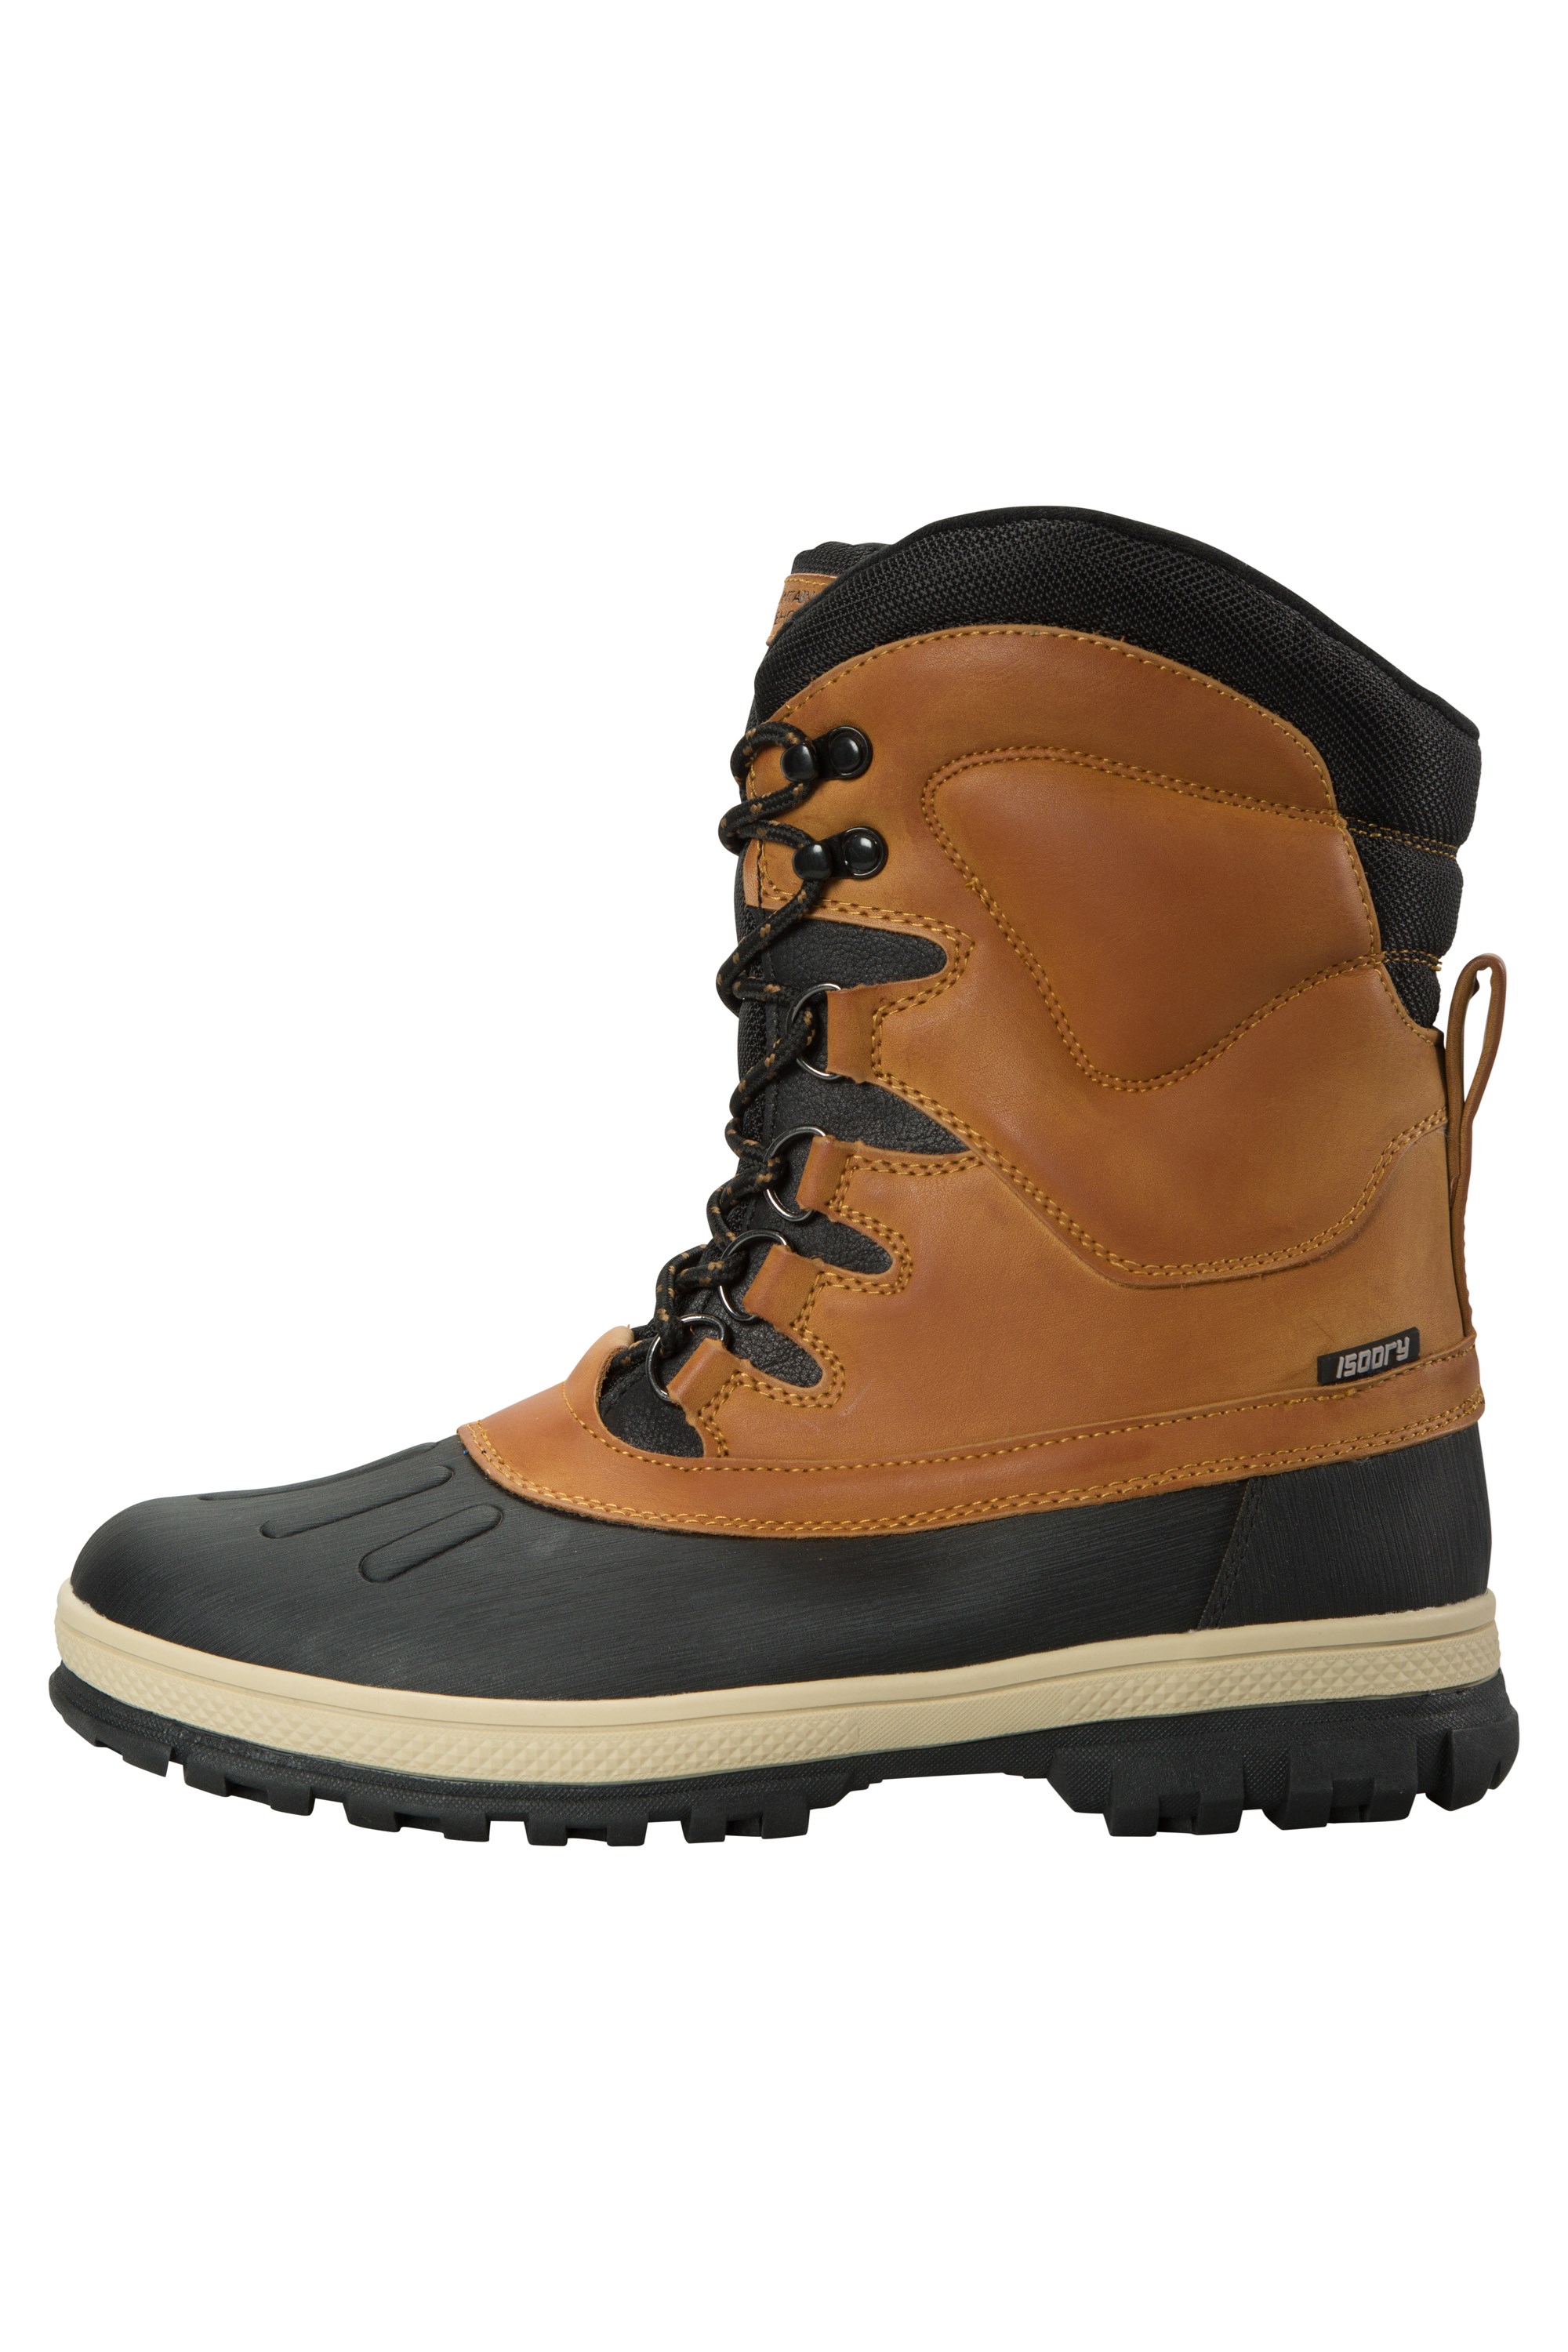 Arctic Thermal Mens Snow Boots | Mountain Warehouse US